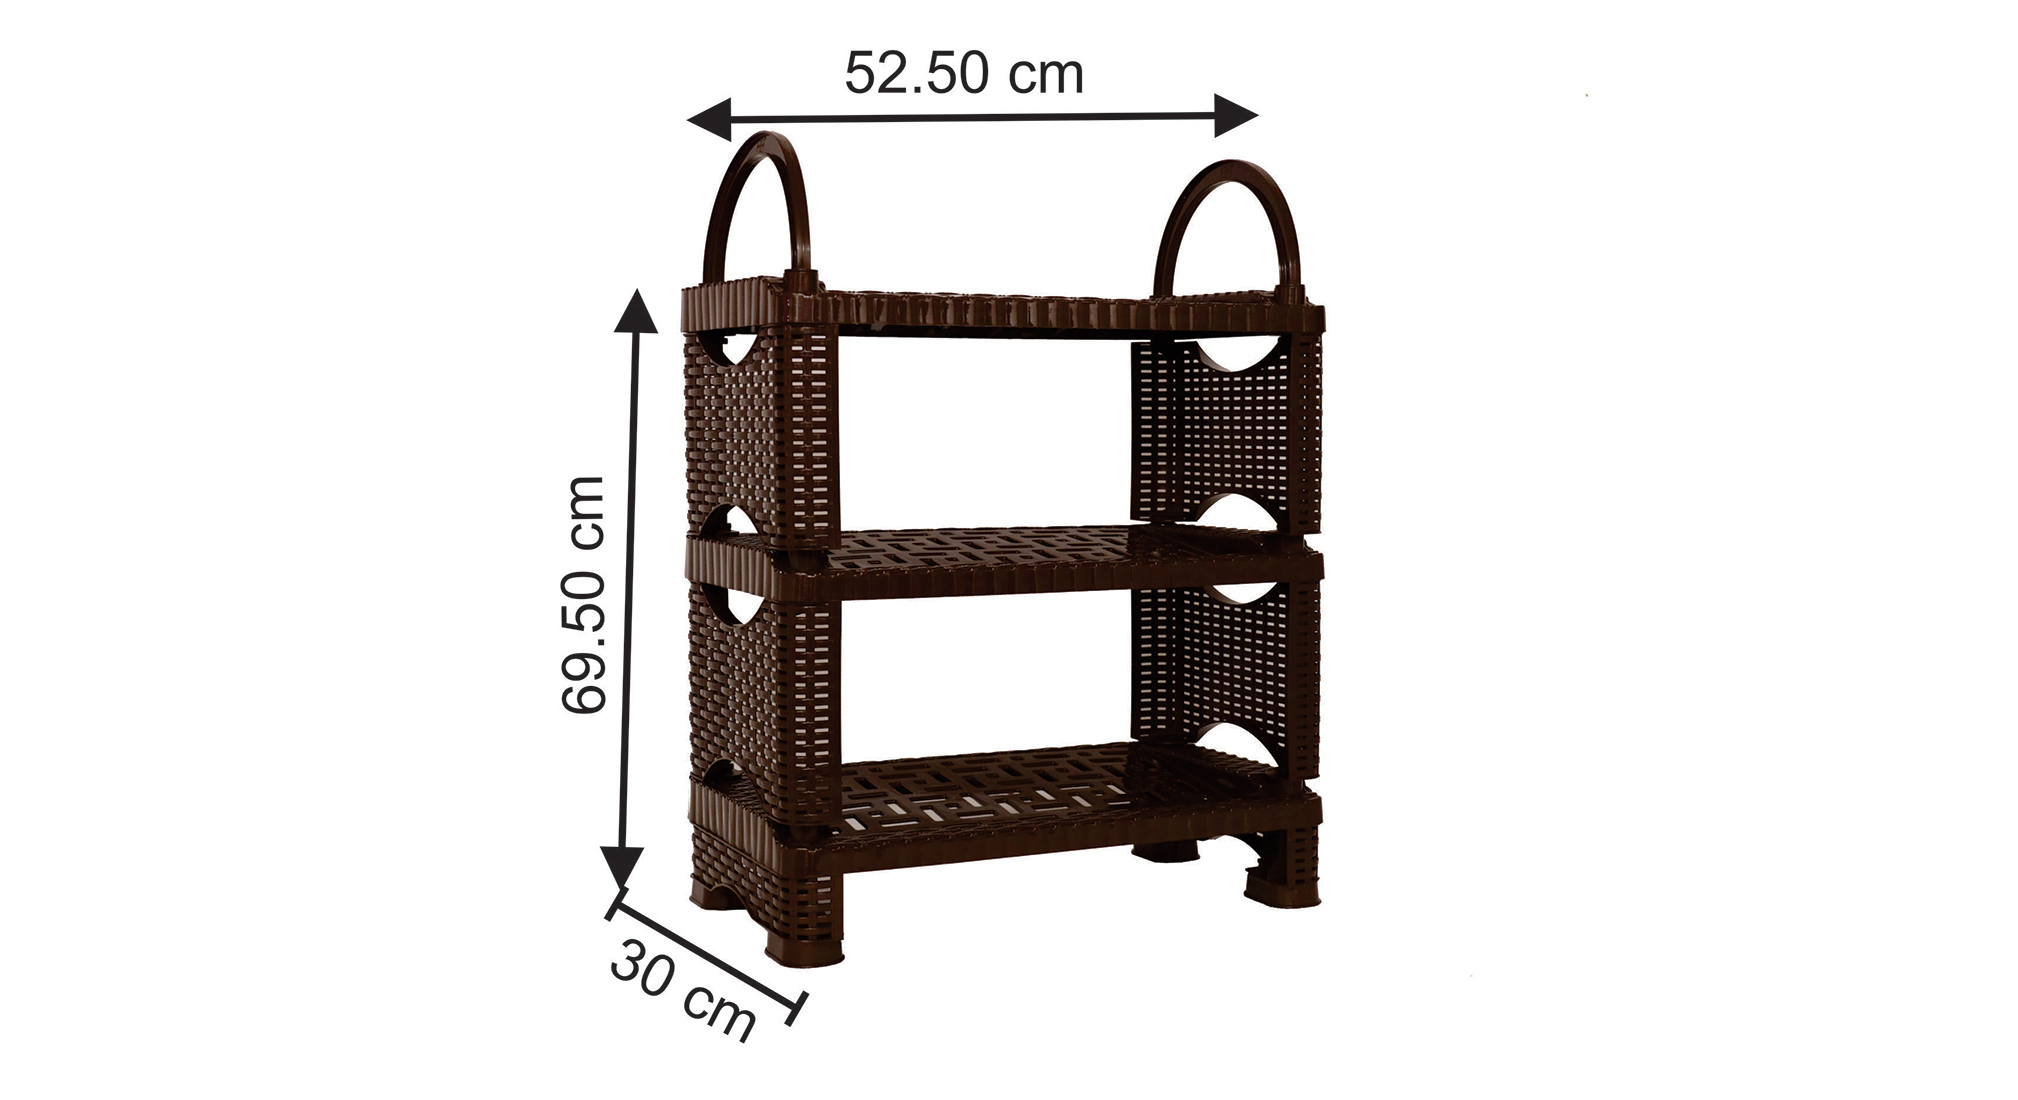 Ford plastic 6 pair shoe rack in brown colour 5